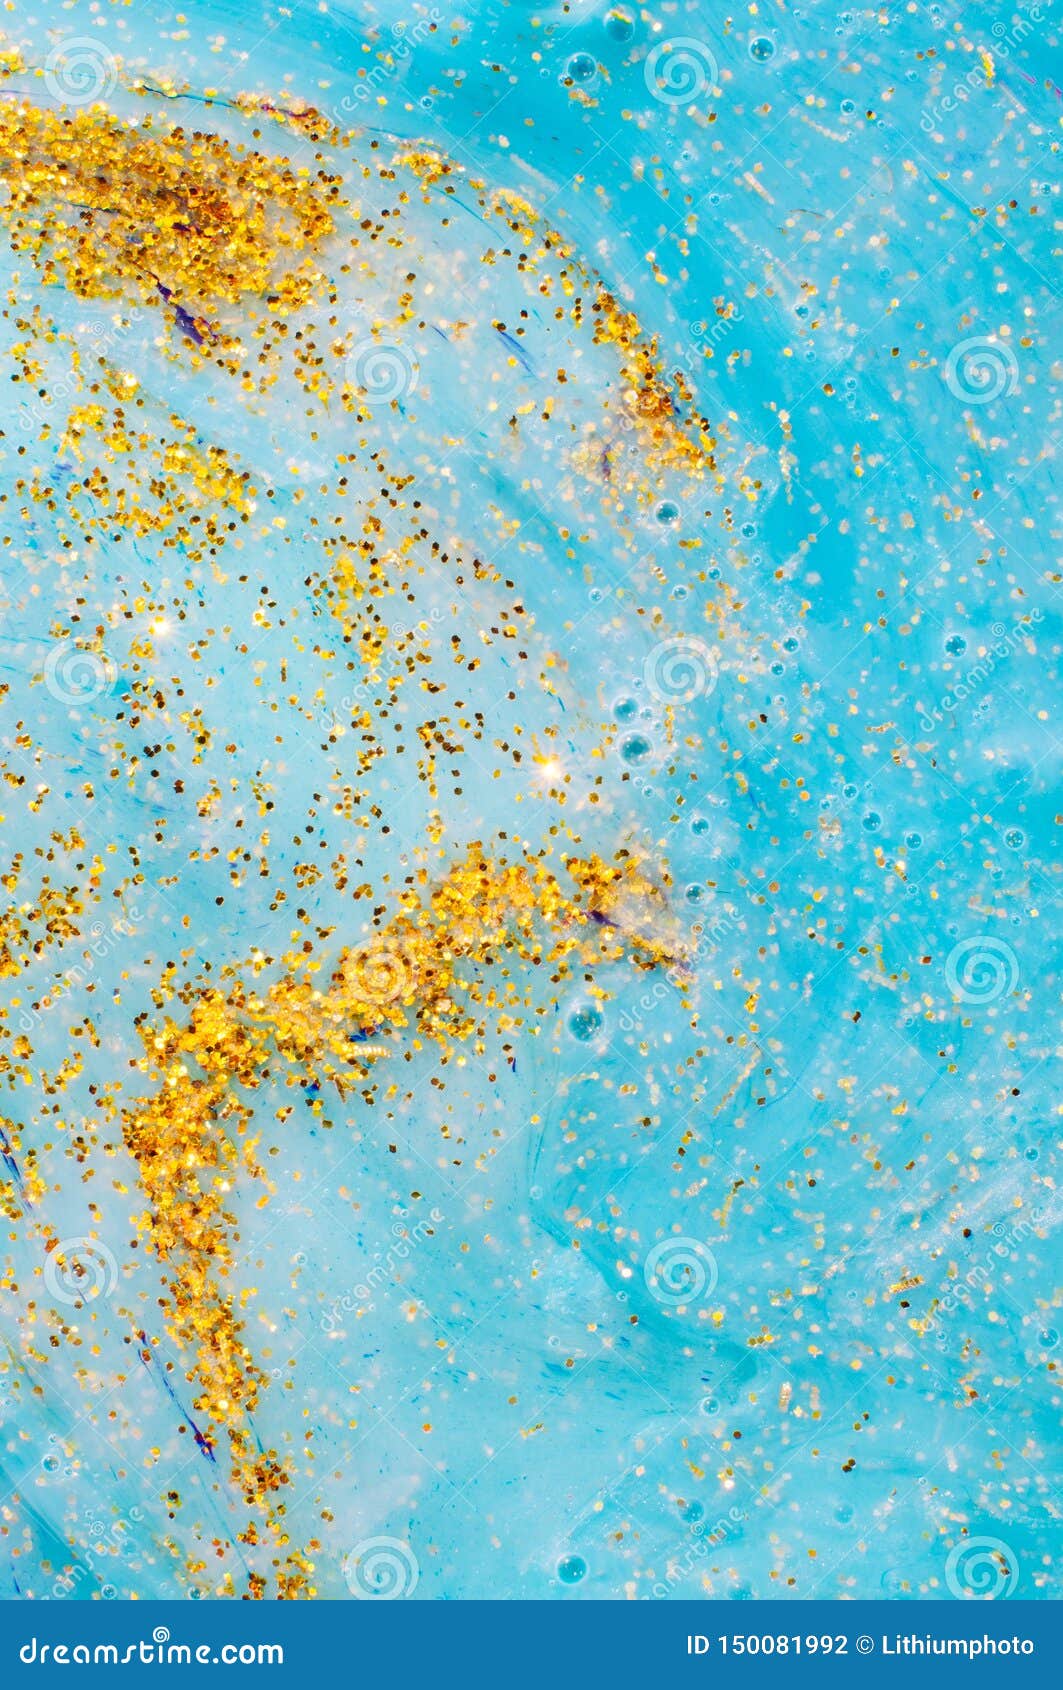 Abstract Textured Background Blue Slime With Golden Glitter Particles